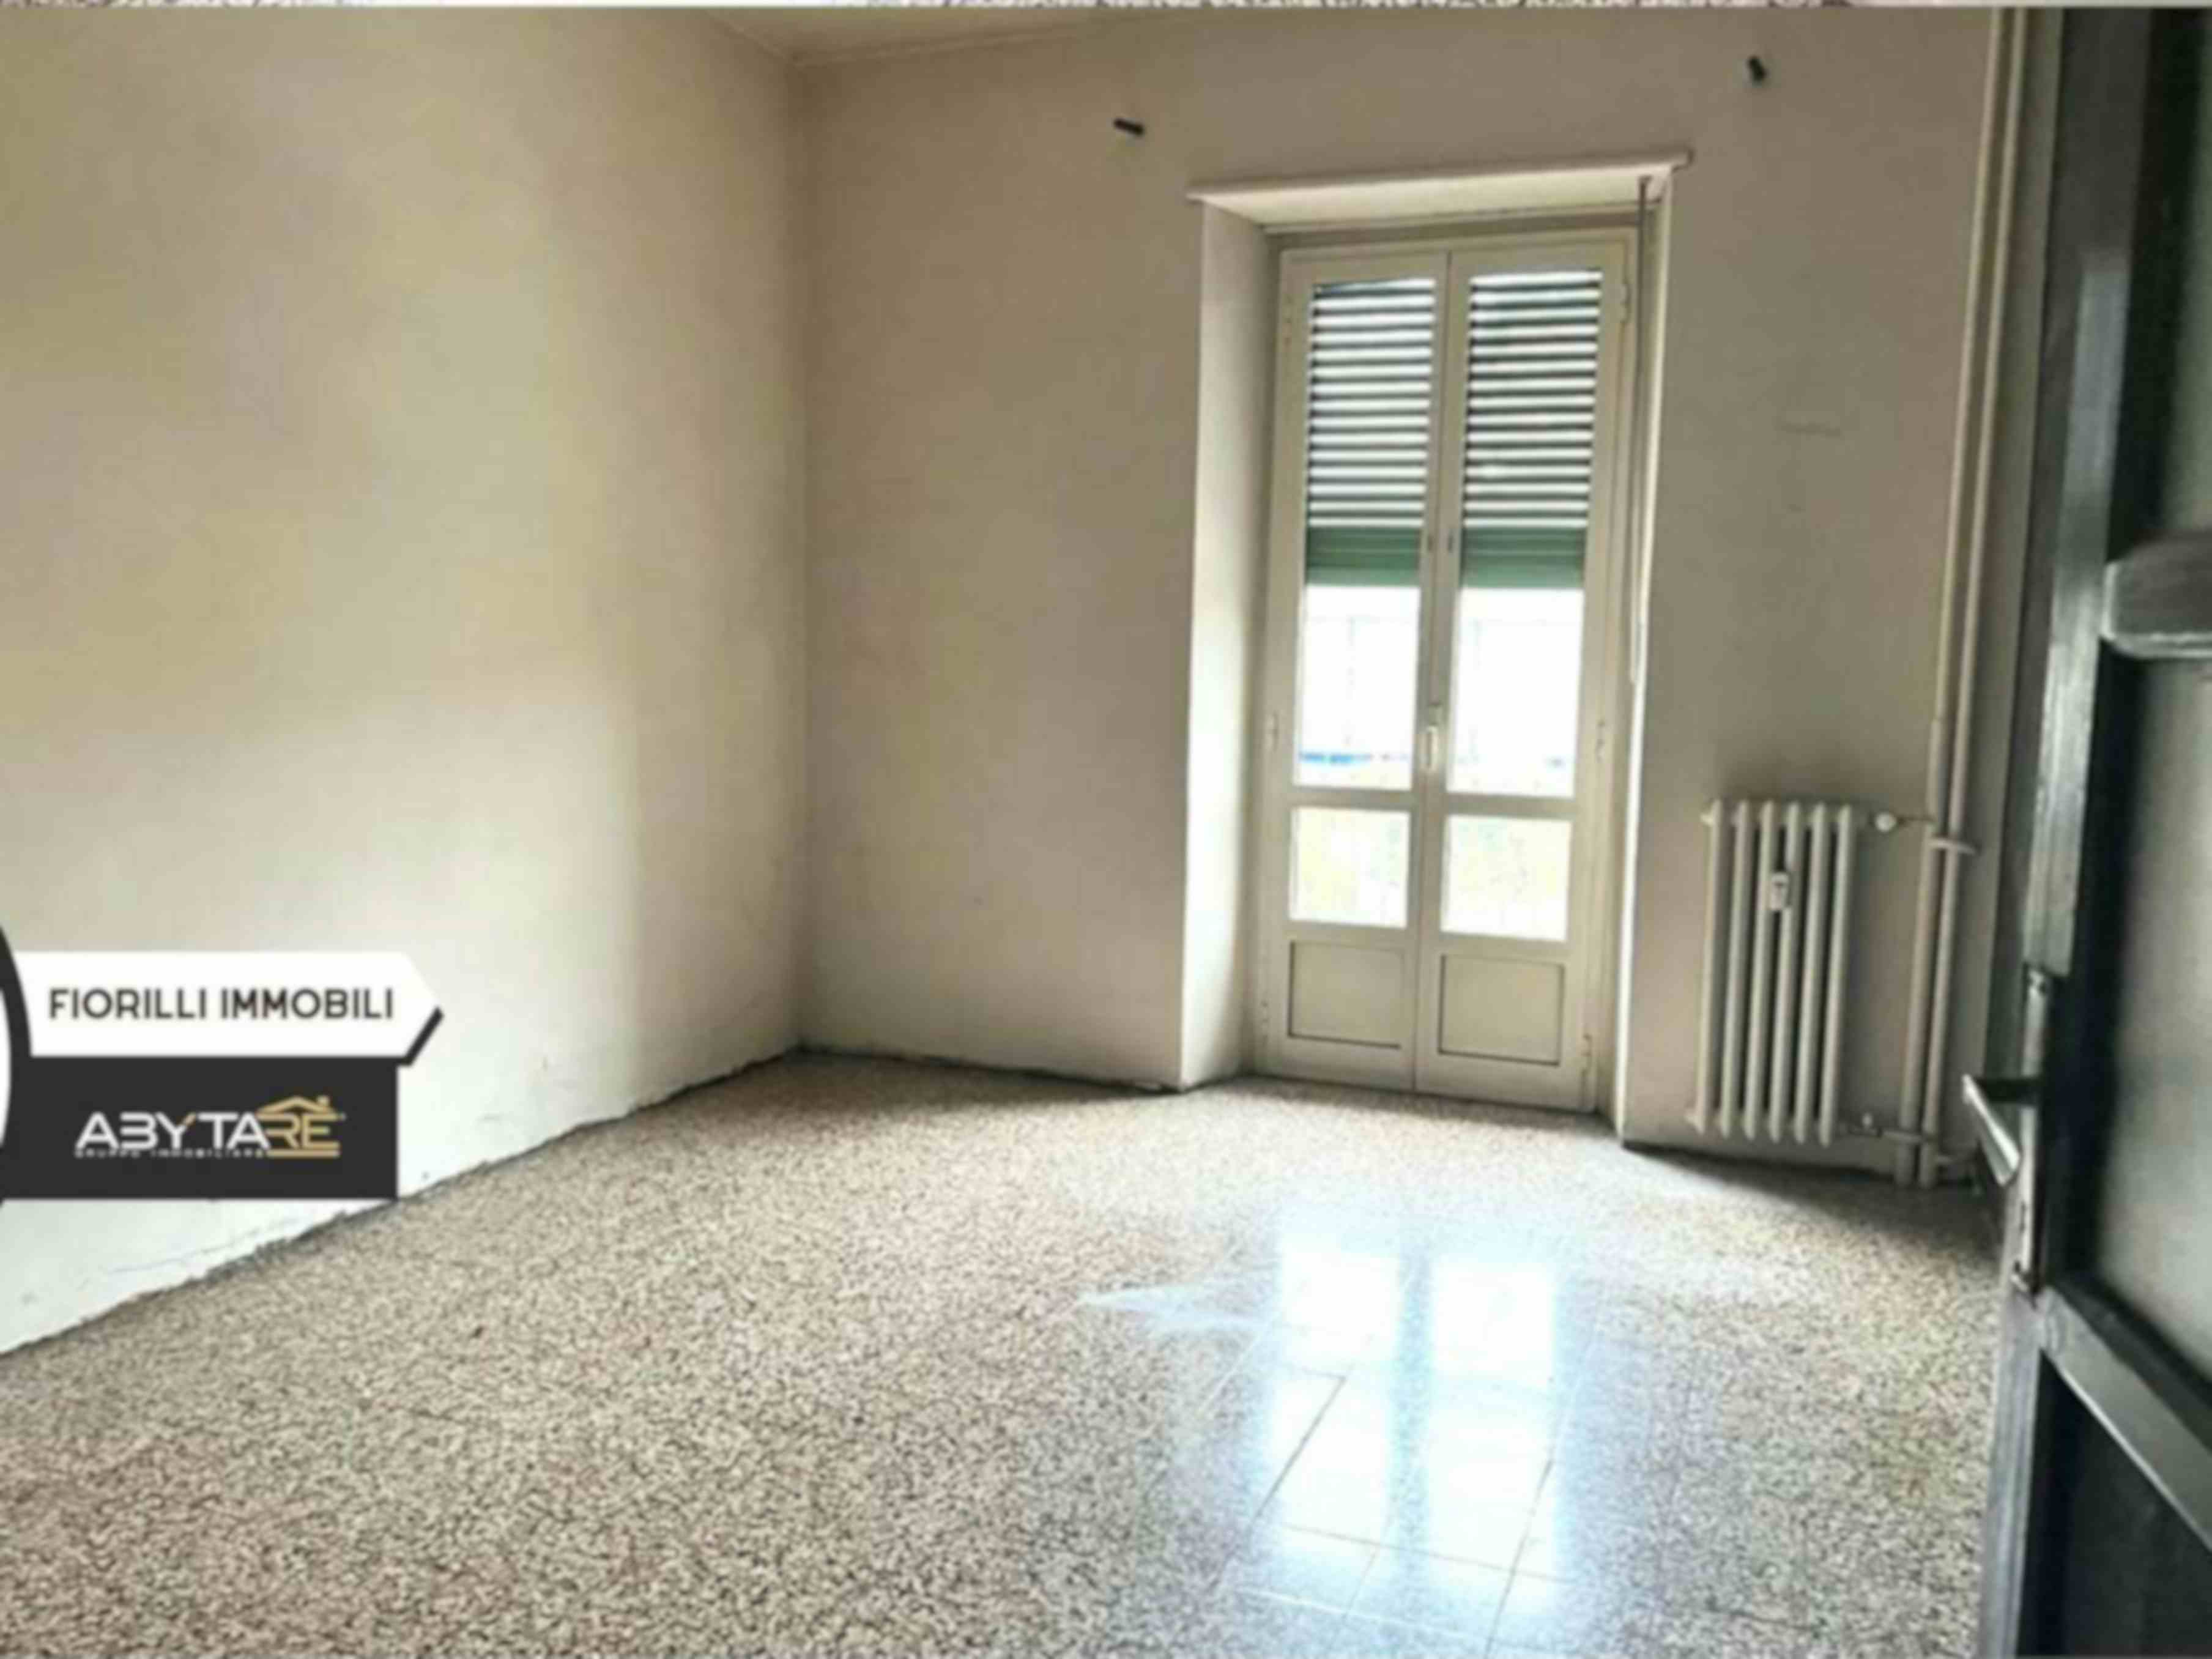 Two-bedroom Apartment of 70m² in Via Lauro Rossi